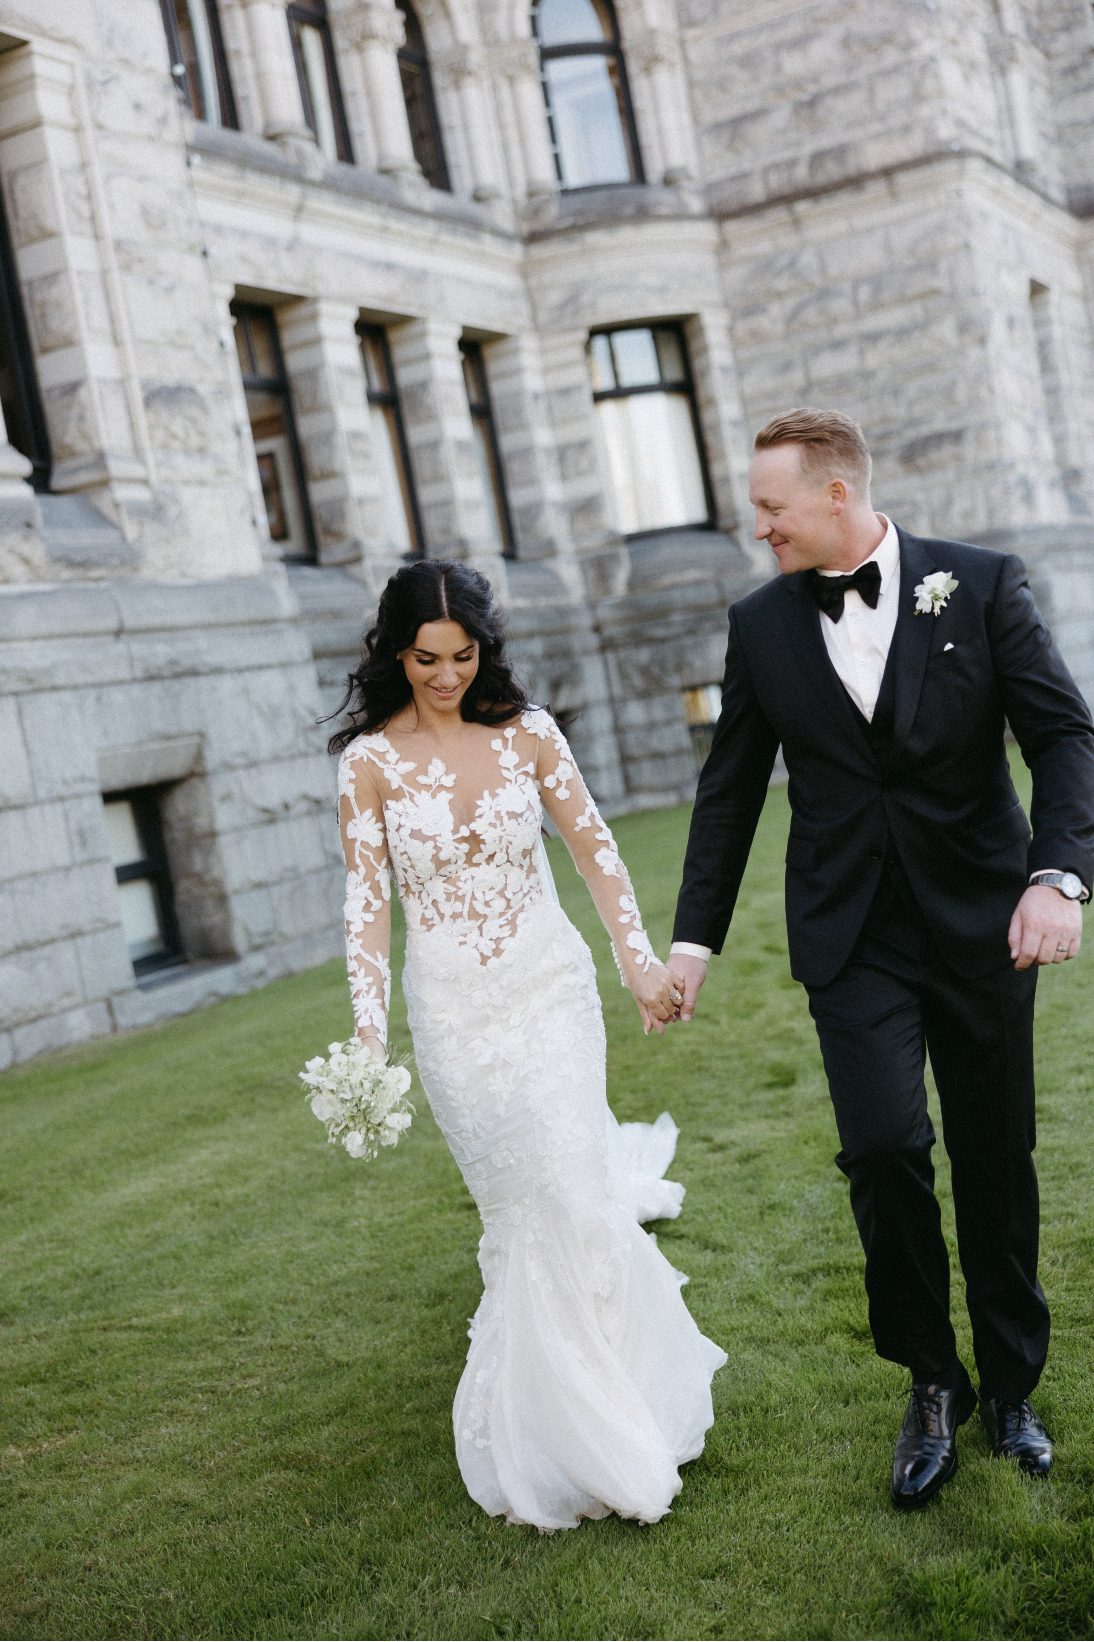 The glowing couple, walking through the grounds, holding hands and both smiling